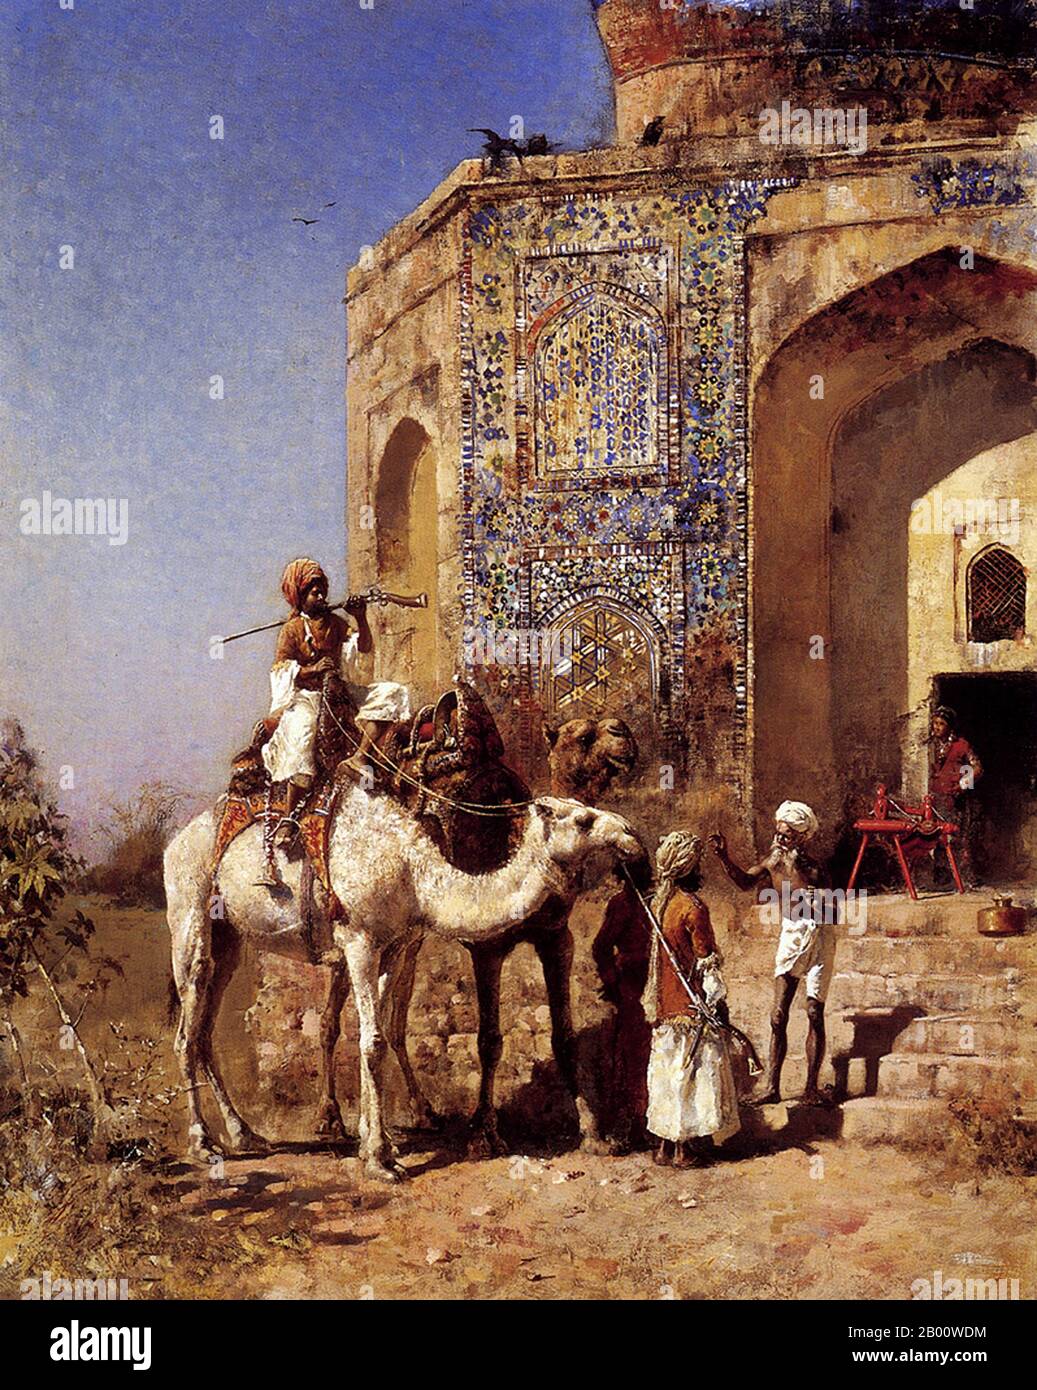 India: 'The Old Blue-Tiled Mosque, outside Delhi, India'. Oil on canvas painting by Edwin Lord Weeks (1849-1903), c. 1885.  Edwin Lord Weeks (1849 – 1903), American artist and Orientalist, was born at Boston, Massachusetts, in 1849. He was a pupil of Léon Bonnat and of Jean-Léon Gérôme, at Paris. He made many voyages to the East, and was distinguished as a painter of oriental scenes.  Weeks' parents were affluent spice and tea merchants from Newton, a suburb of Boston and as such they were able to accept, probably encourage, and certainly finance their son's youthful interest in painting. Stock Photo